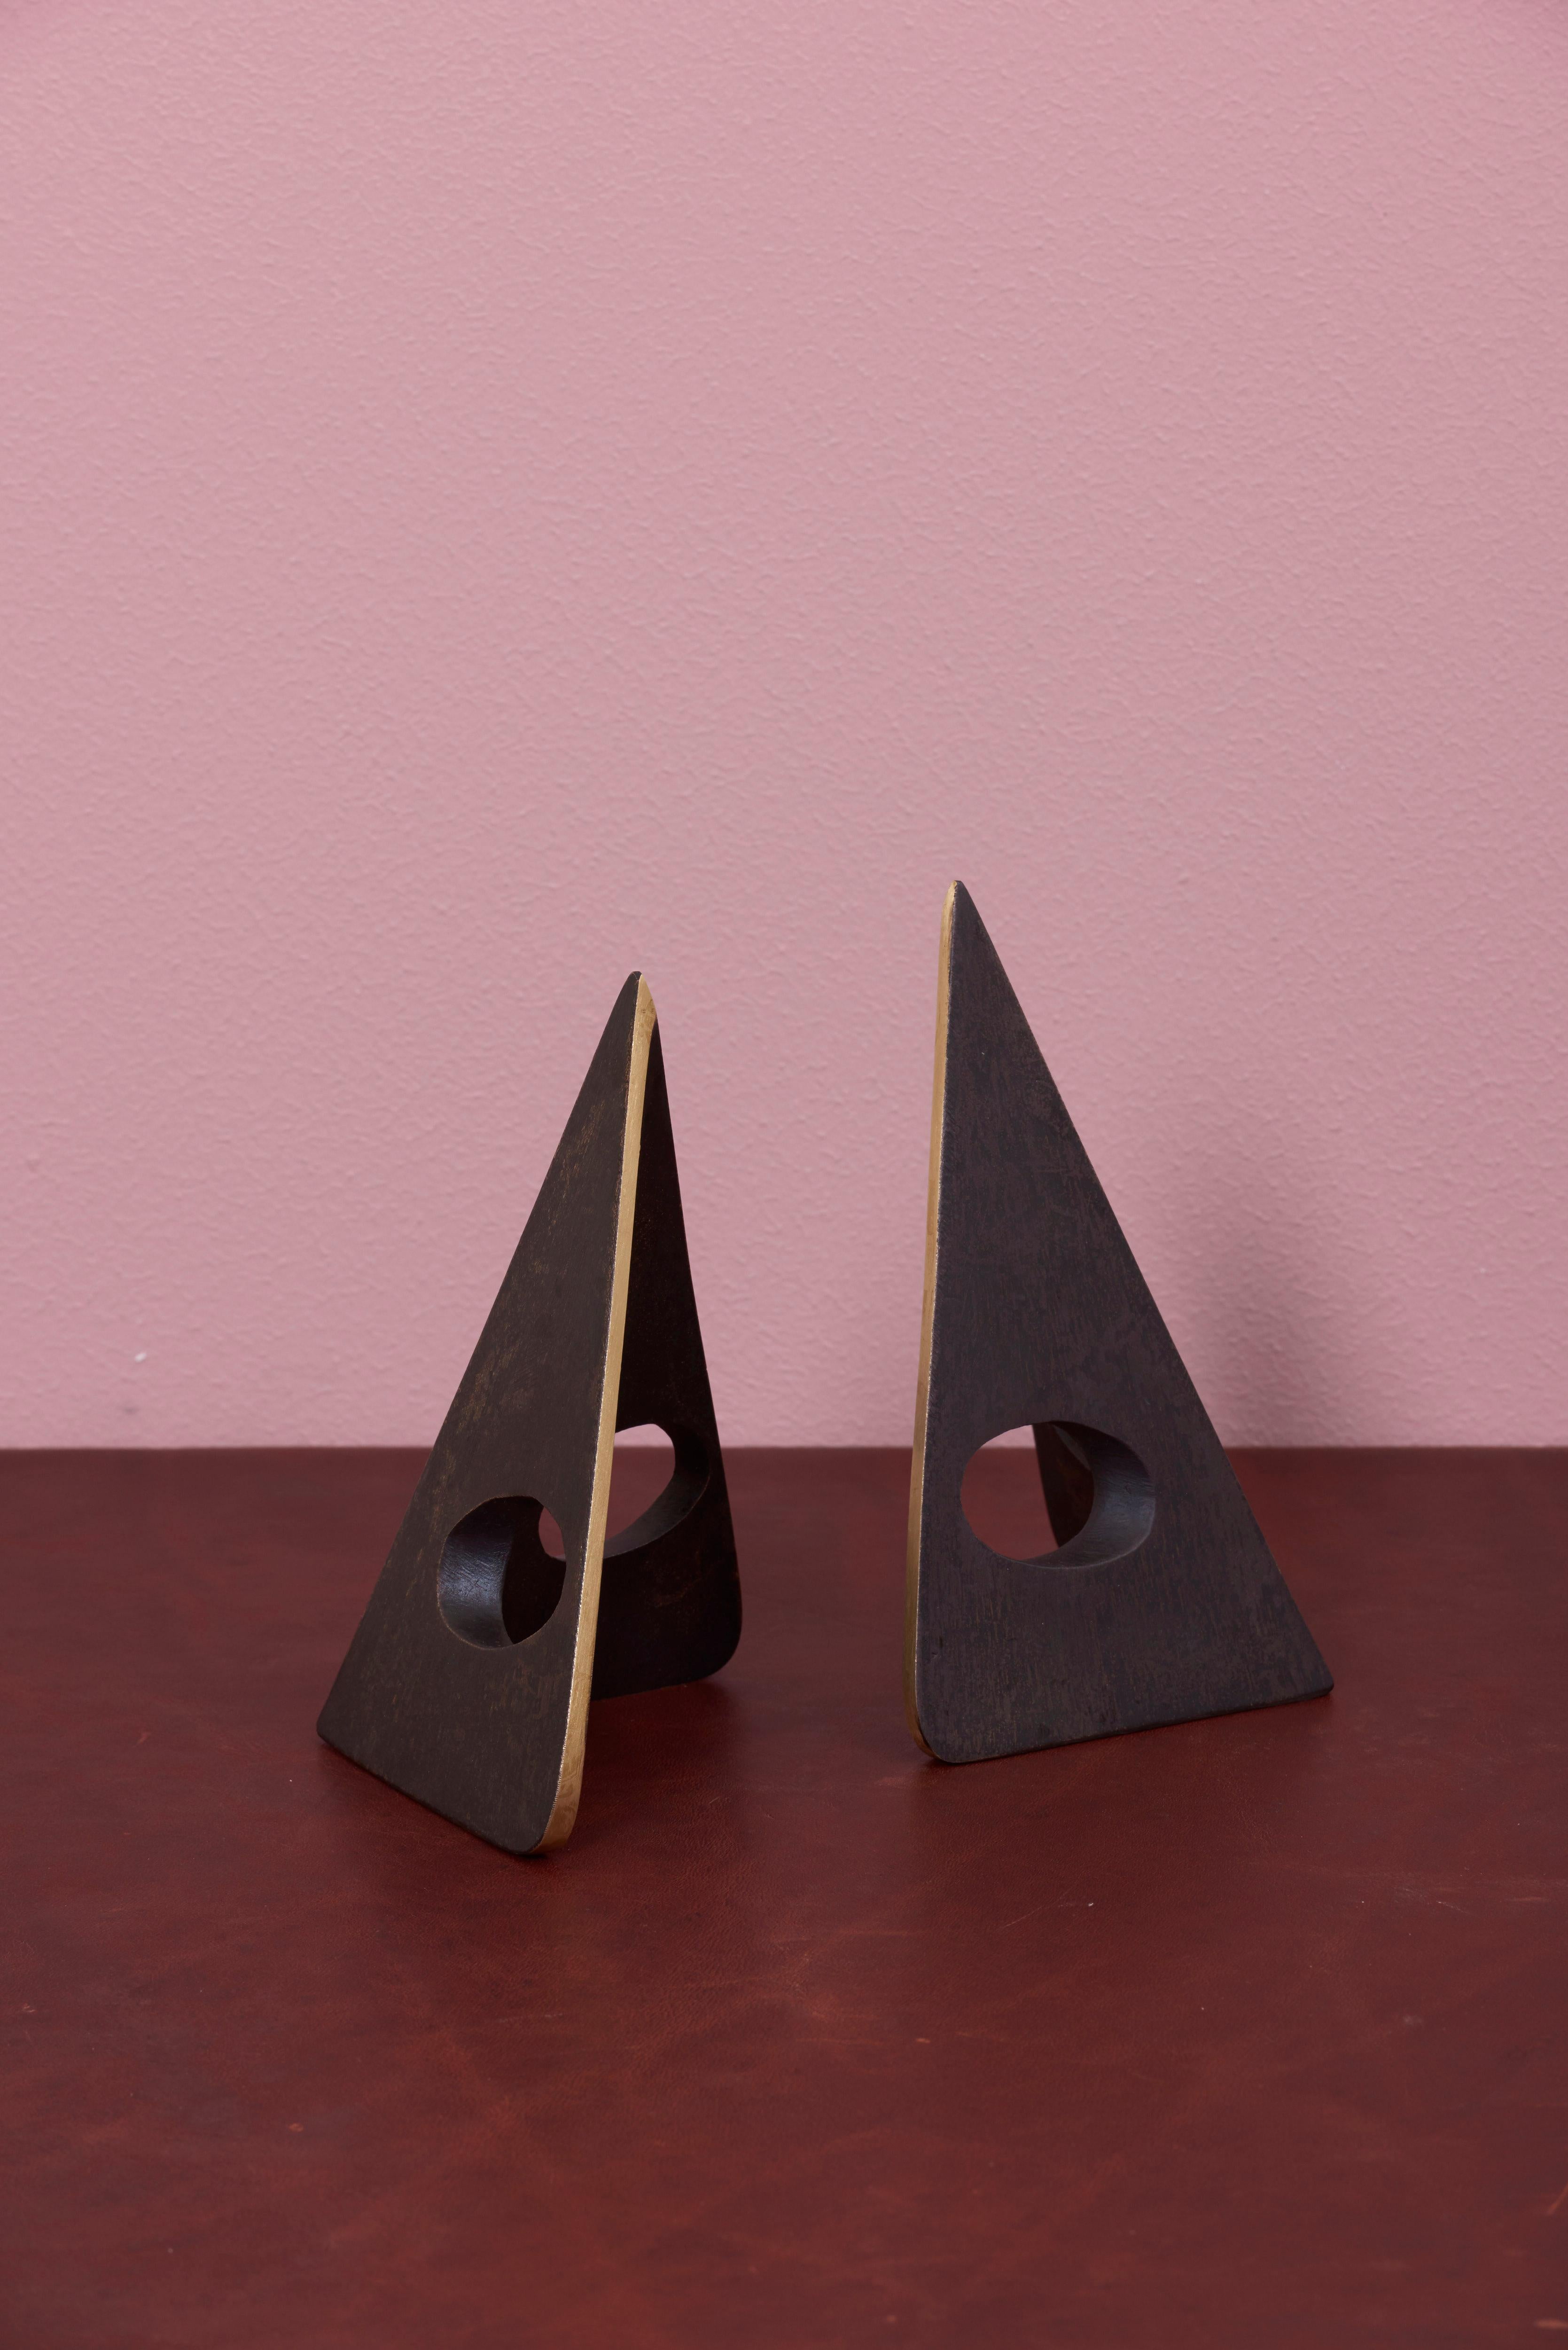 Classic pair of Carl Auböck bookends in a patina and polish brass mix.

